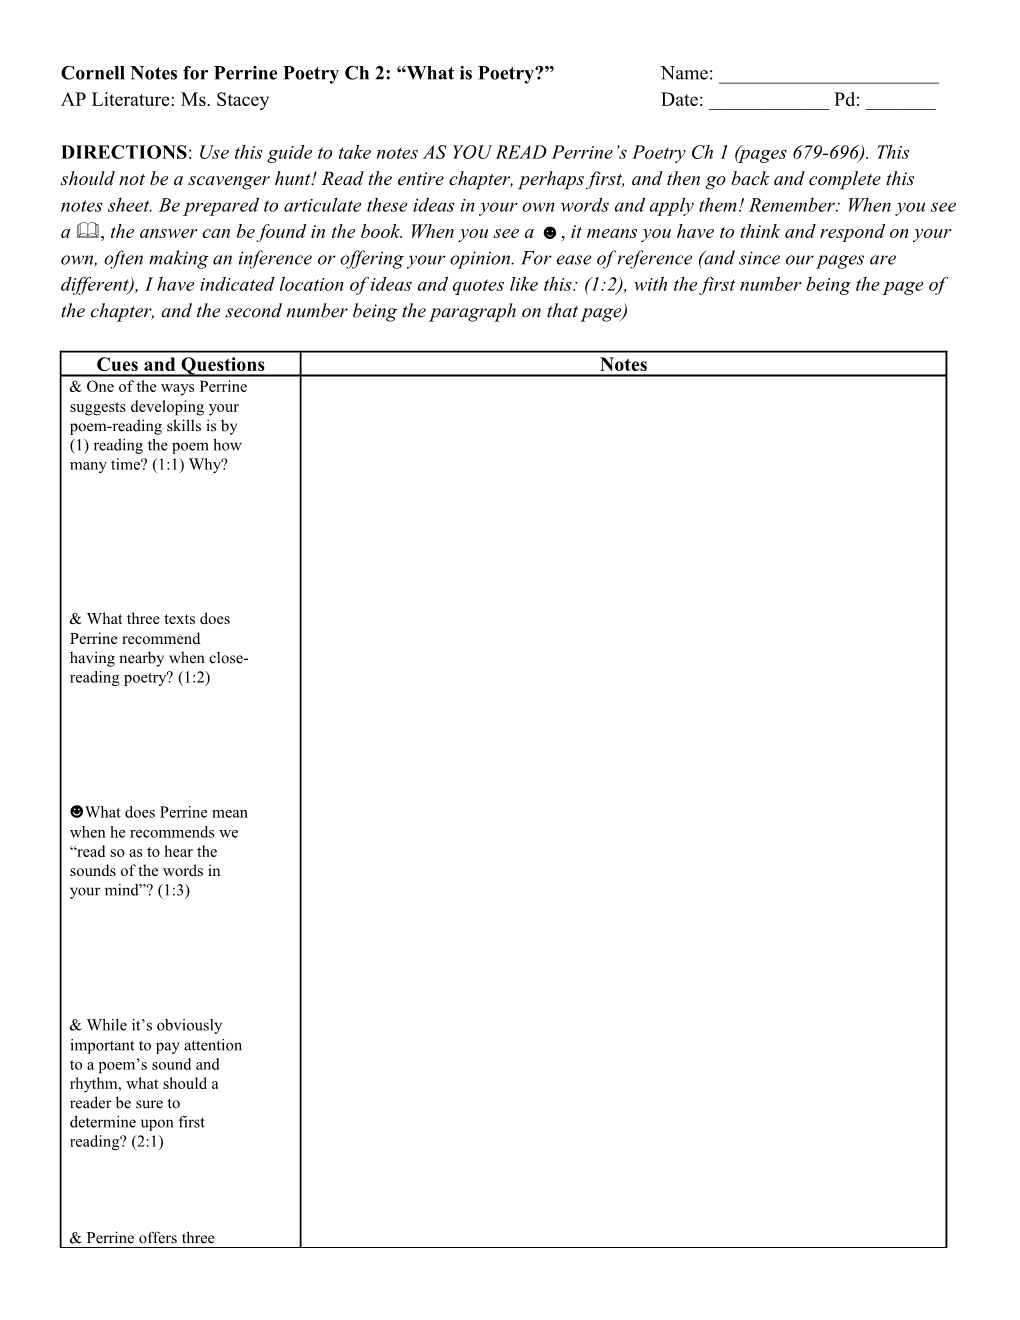 Cornell Notes for Theme